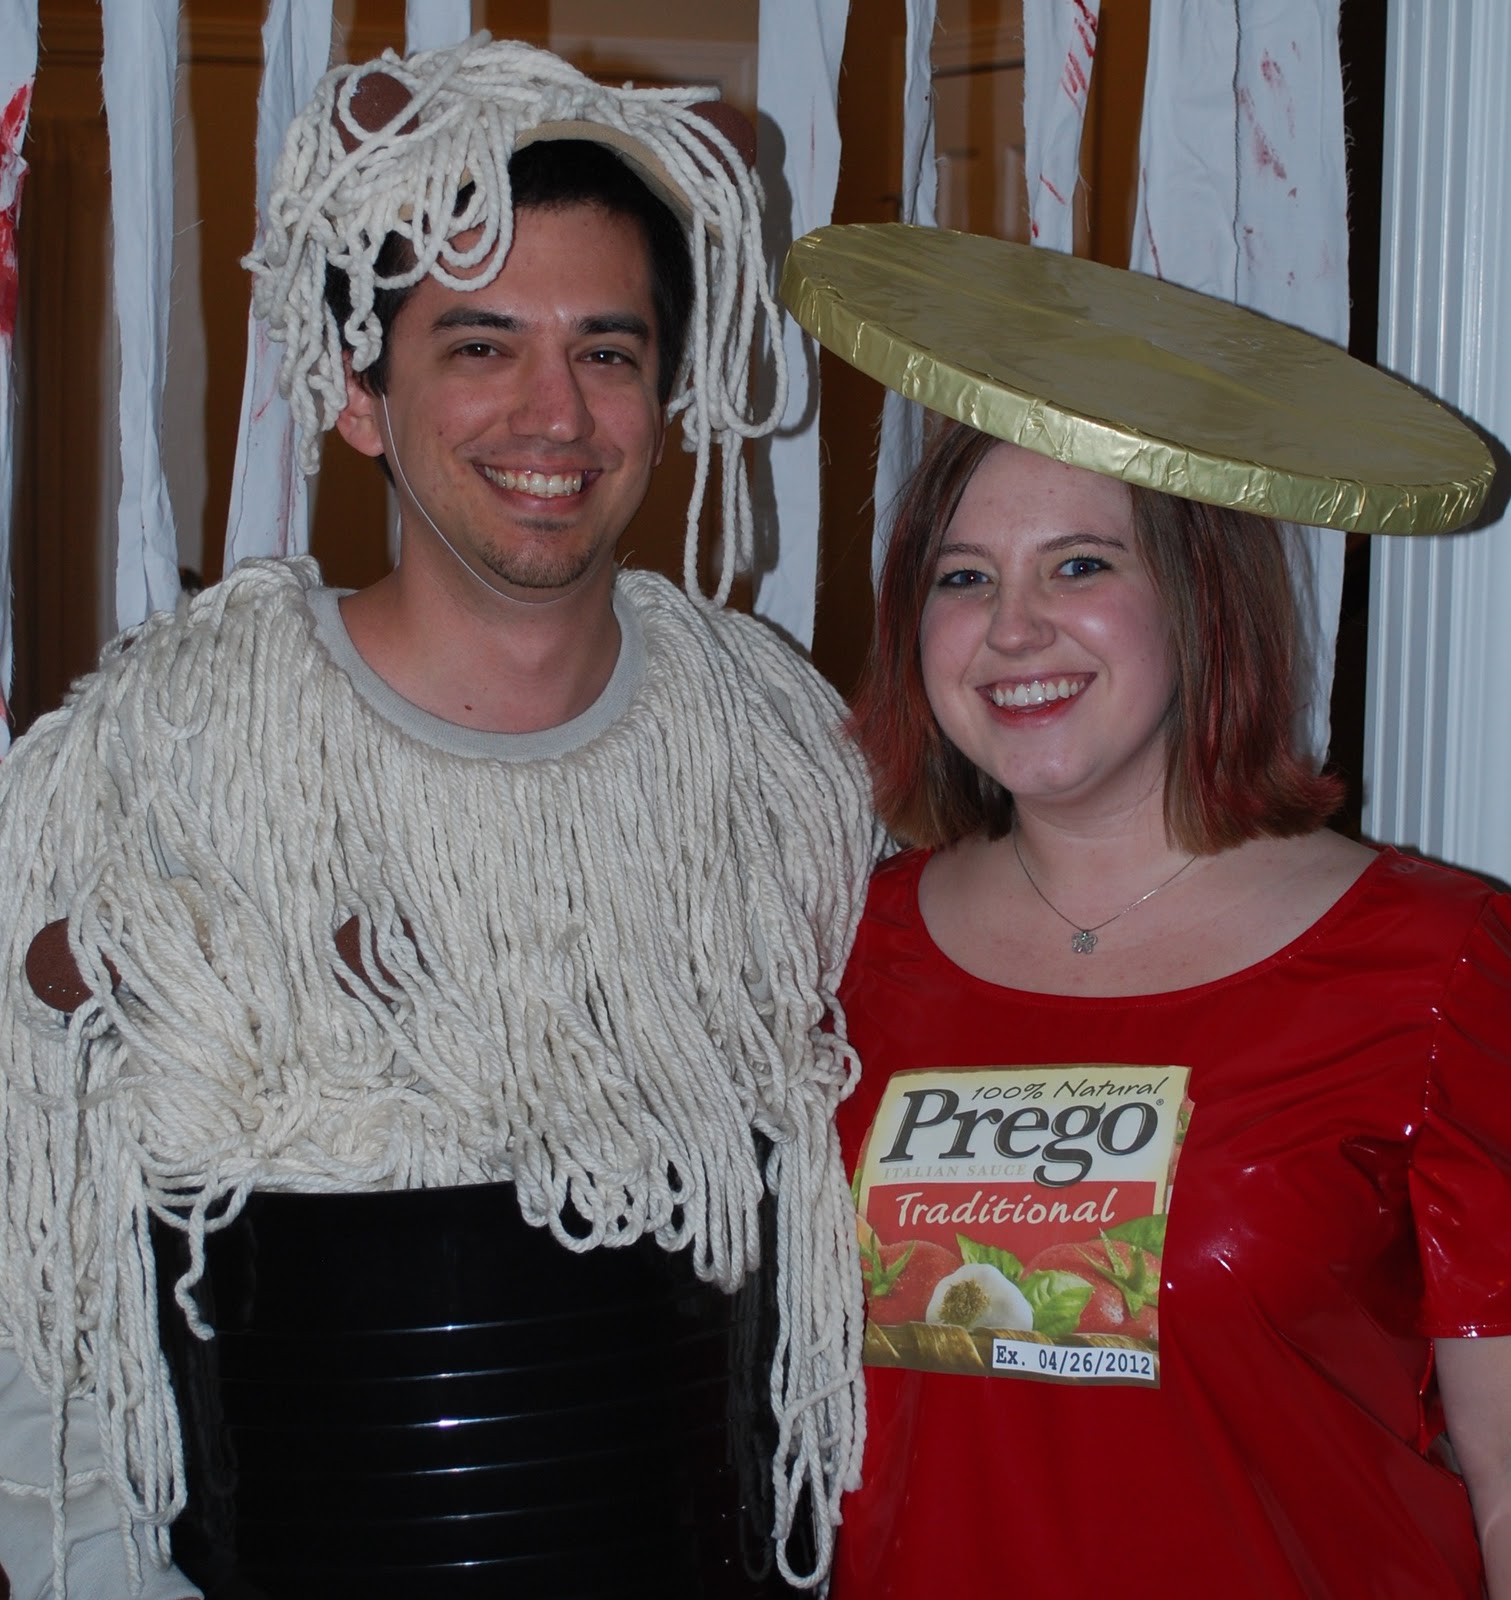 Being Prego simply suggests this fun costume.